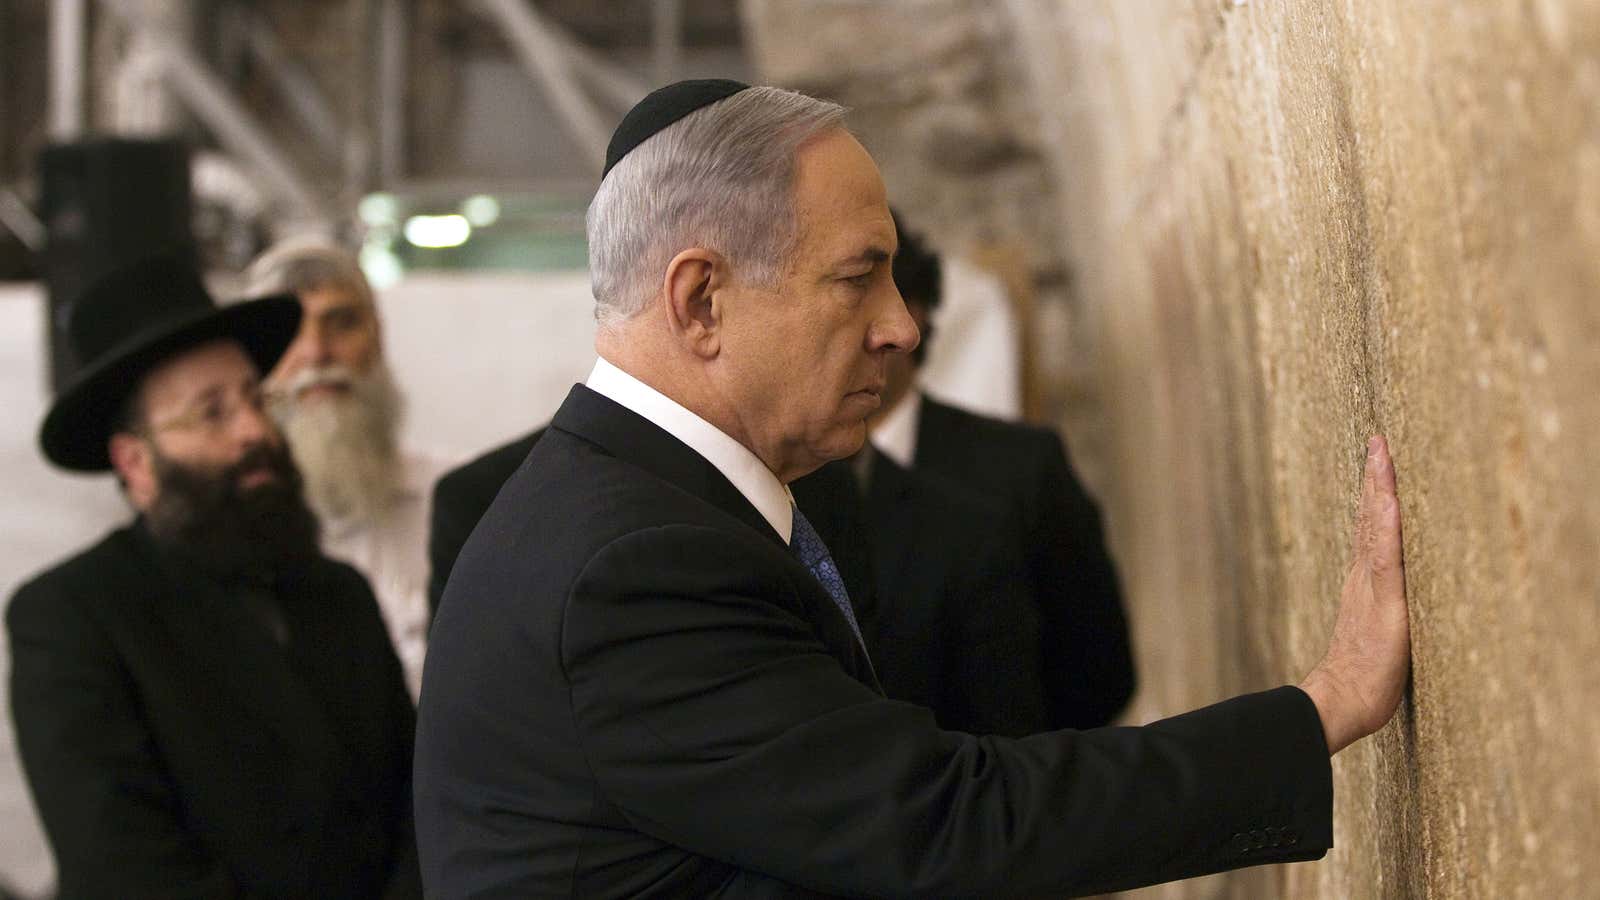 Israel’s Prime Minister Benjamin Netanyahu touches the stones of the Western Wall, Judaism’s holiest prayer site, in Jerusalem’s Old City a day after winning Israel’s election for prime minister.